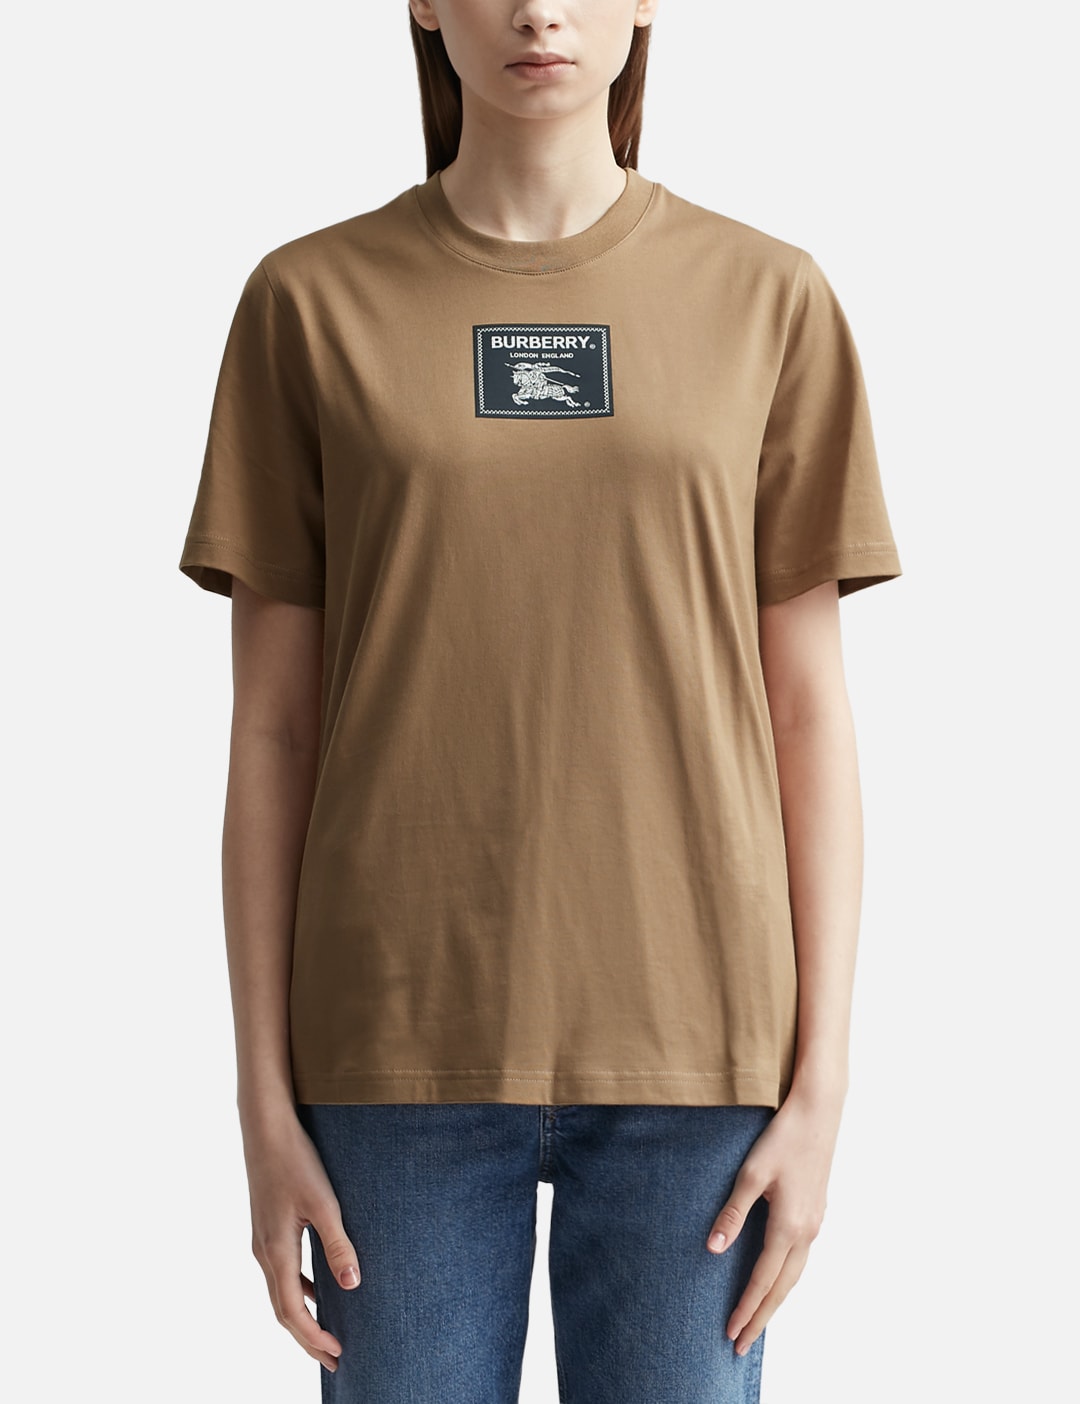 Burberry - Prorsum Label Cotton T-shirt | HBX - Globally Curated Fashion  and Lifestyle by Hypebeast